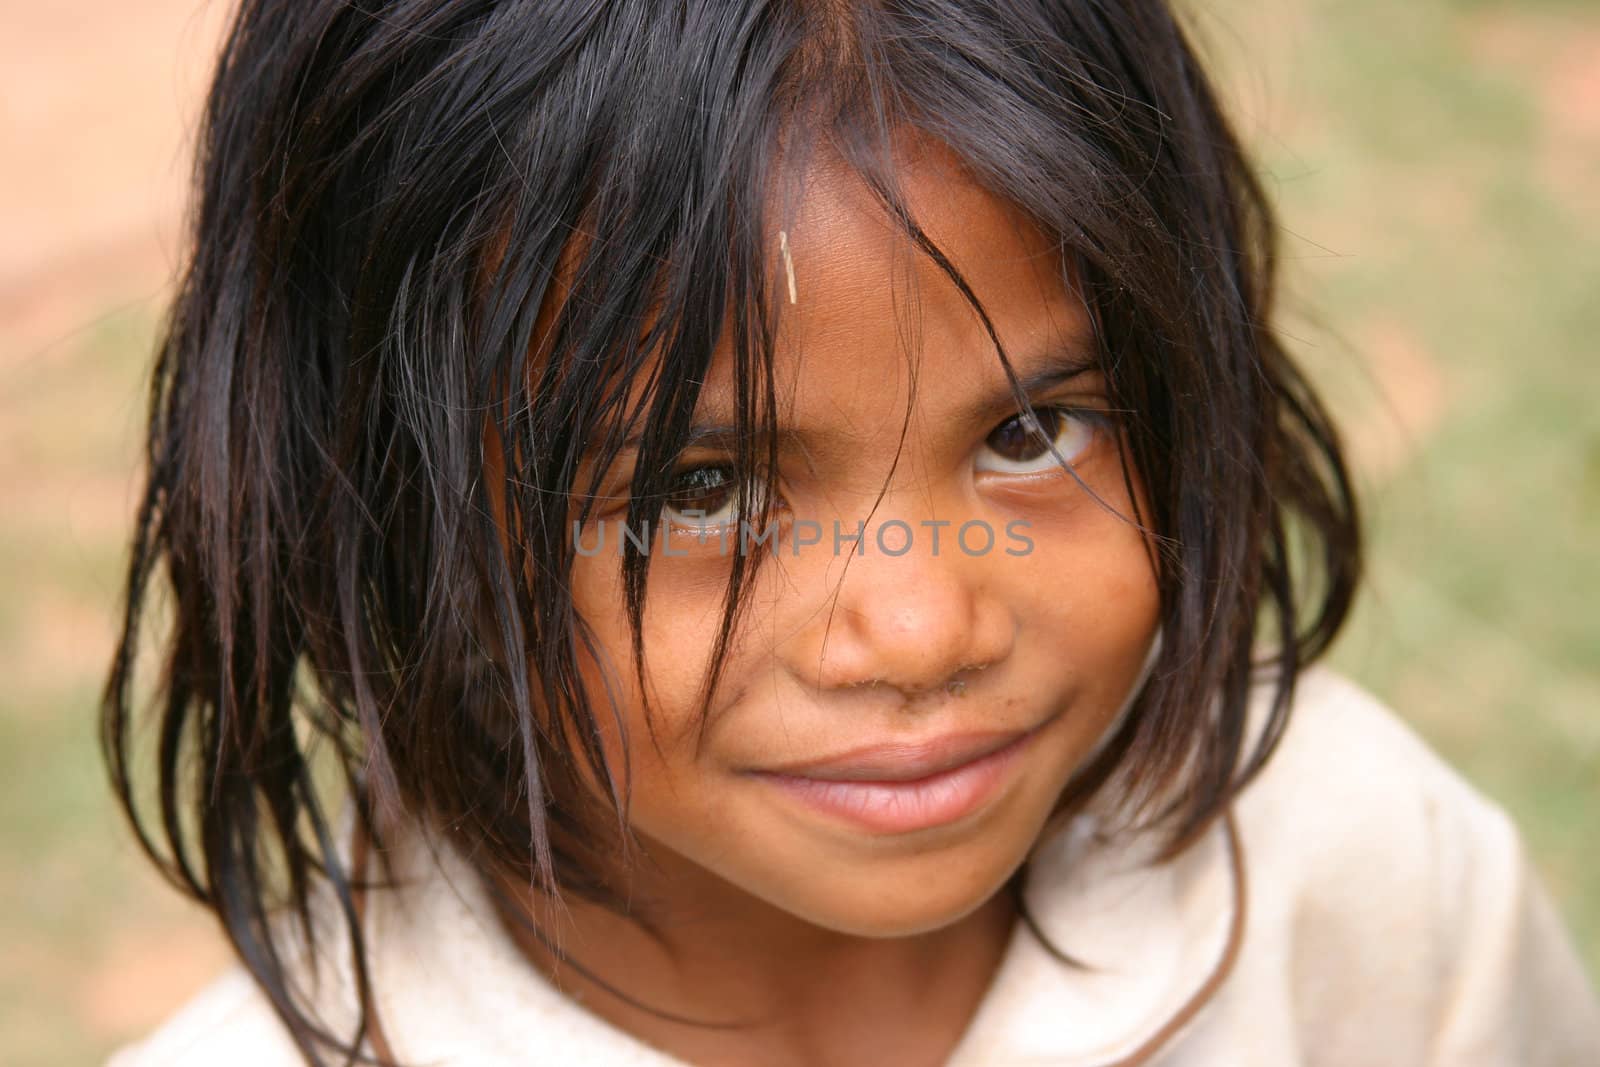 Smiling young girl in Madagascar looking up